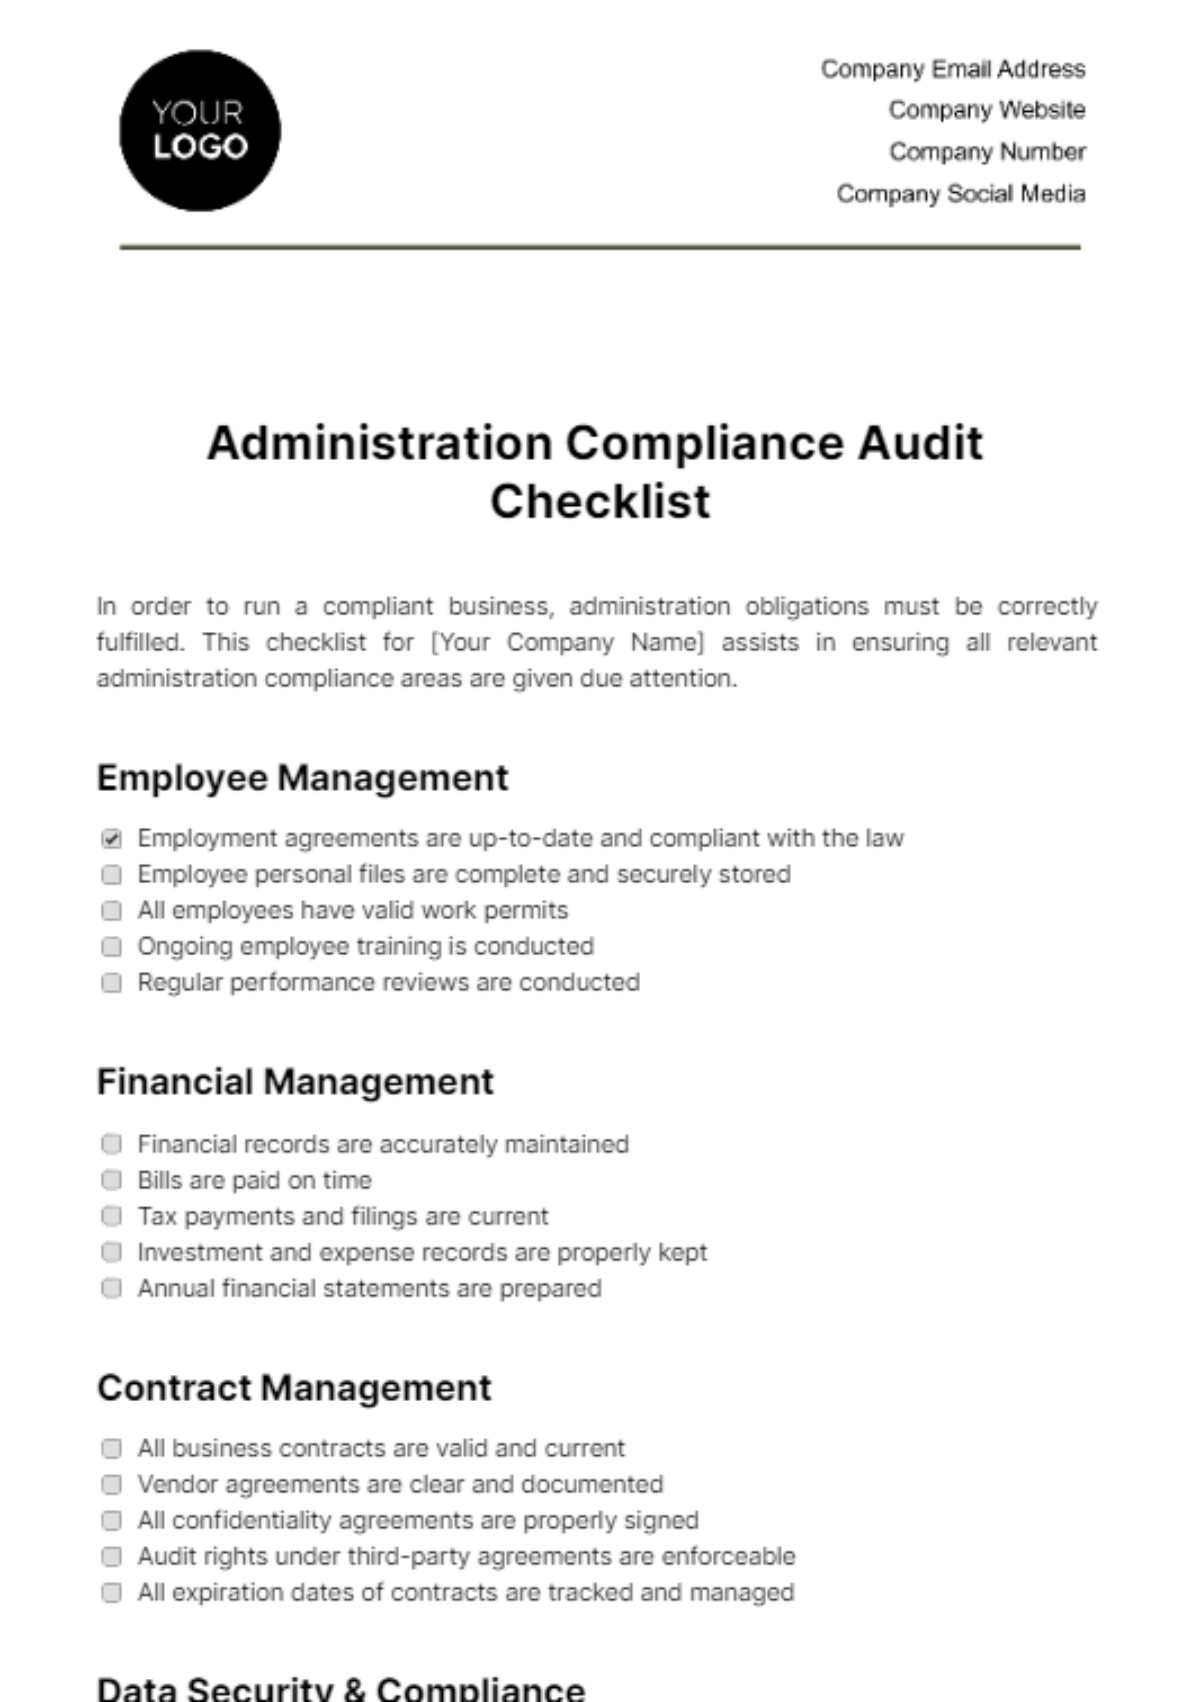 Free Administration Compliance Audit Checklist Template